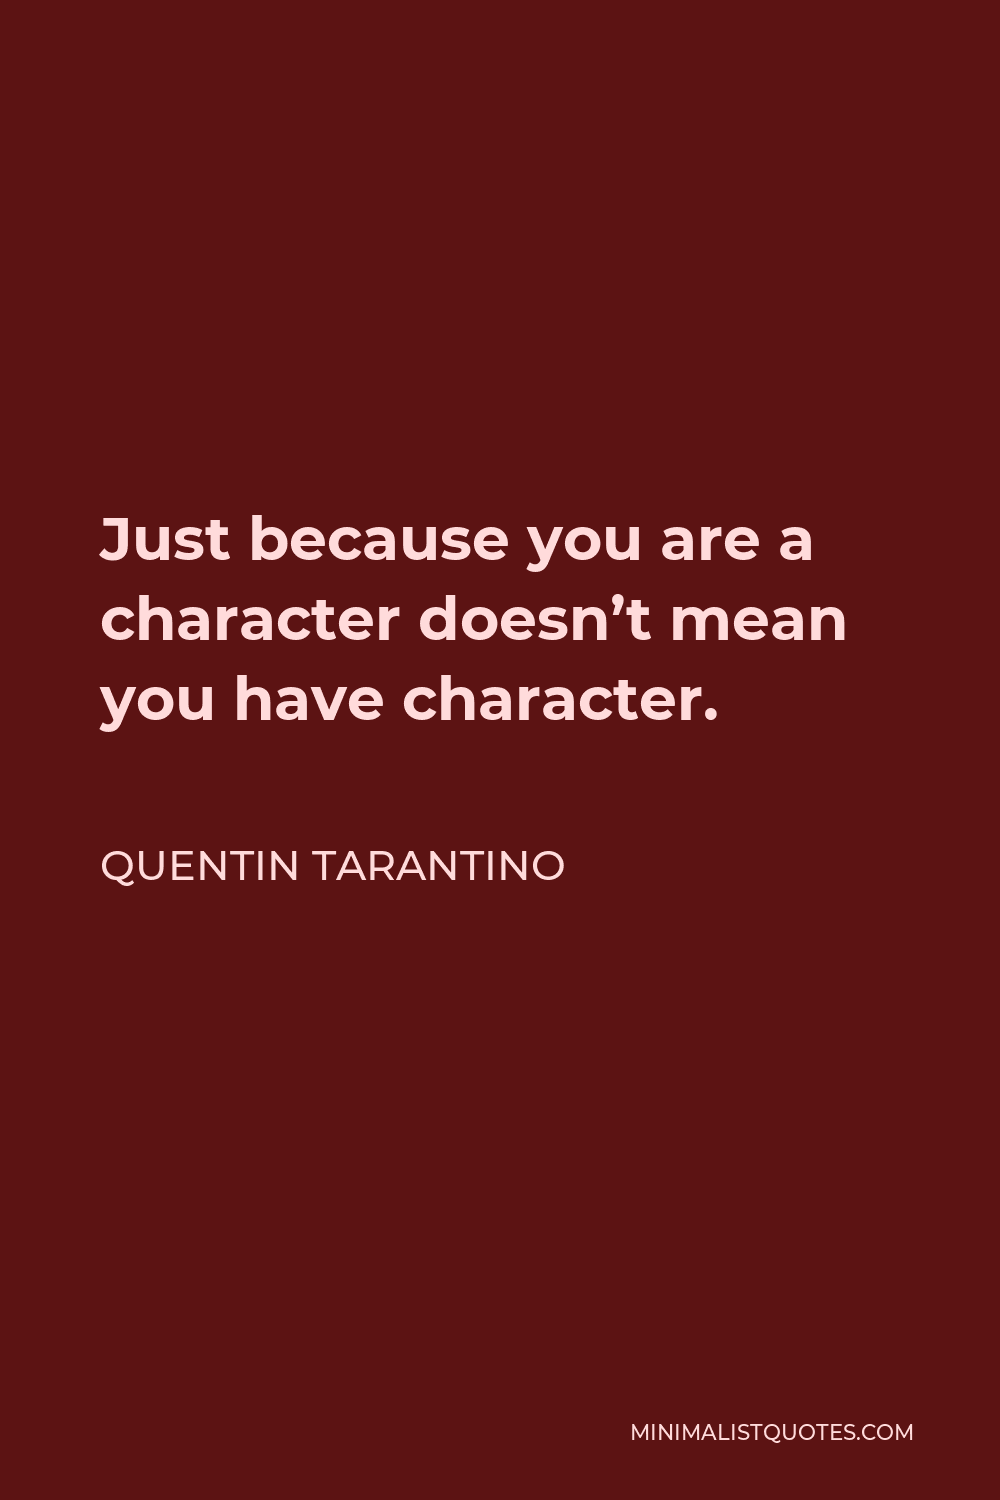 Quentin Tarantino Quote - Just because you are a character doesn’t mean you have character.